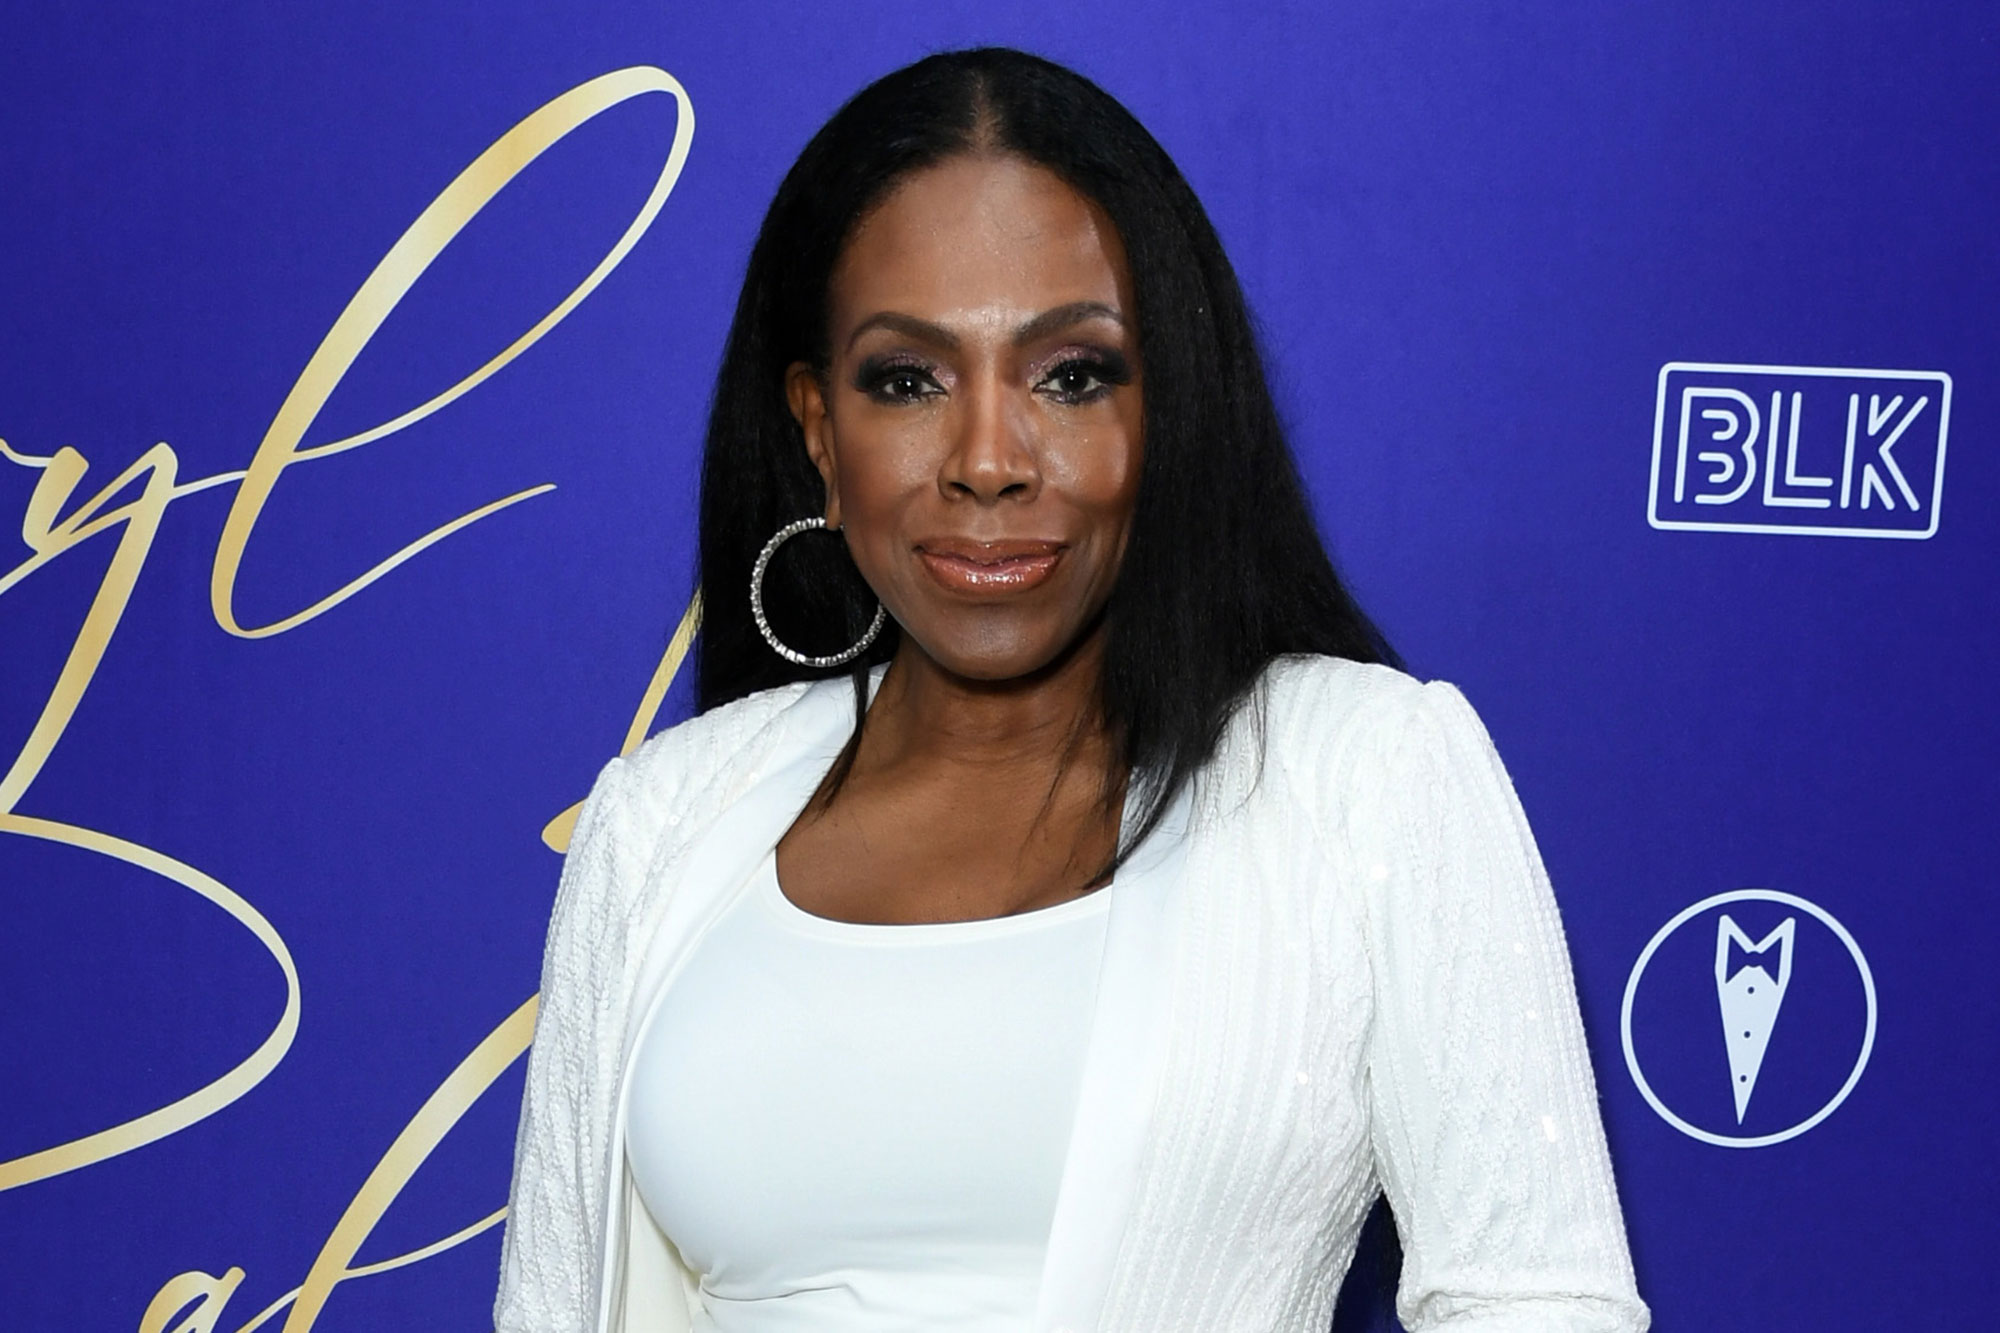 Sheryl Lee Ralph attends a private reception honoring Sheryl Lee Ralph hosted by Better Brothers Los Angeles and BLK at SLS Hotel, a Luxury Collection Hotel, Beverly Hills on March 03, 2023